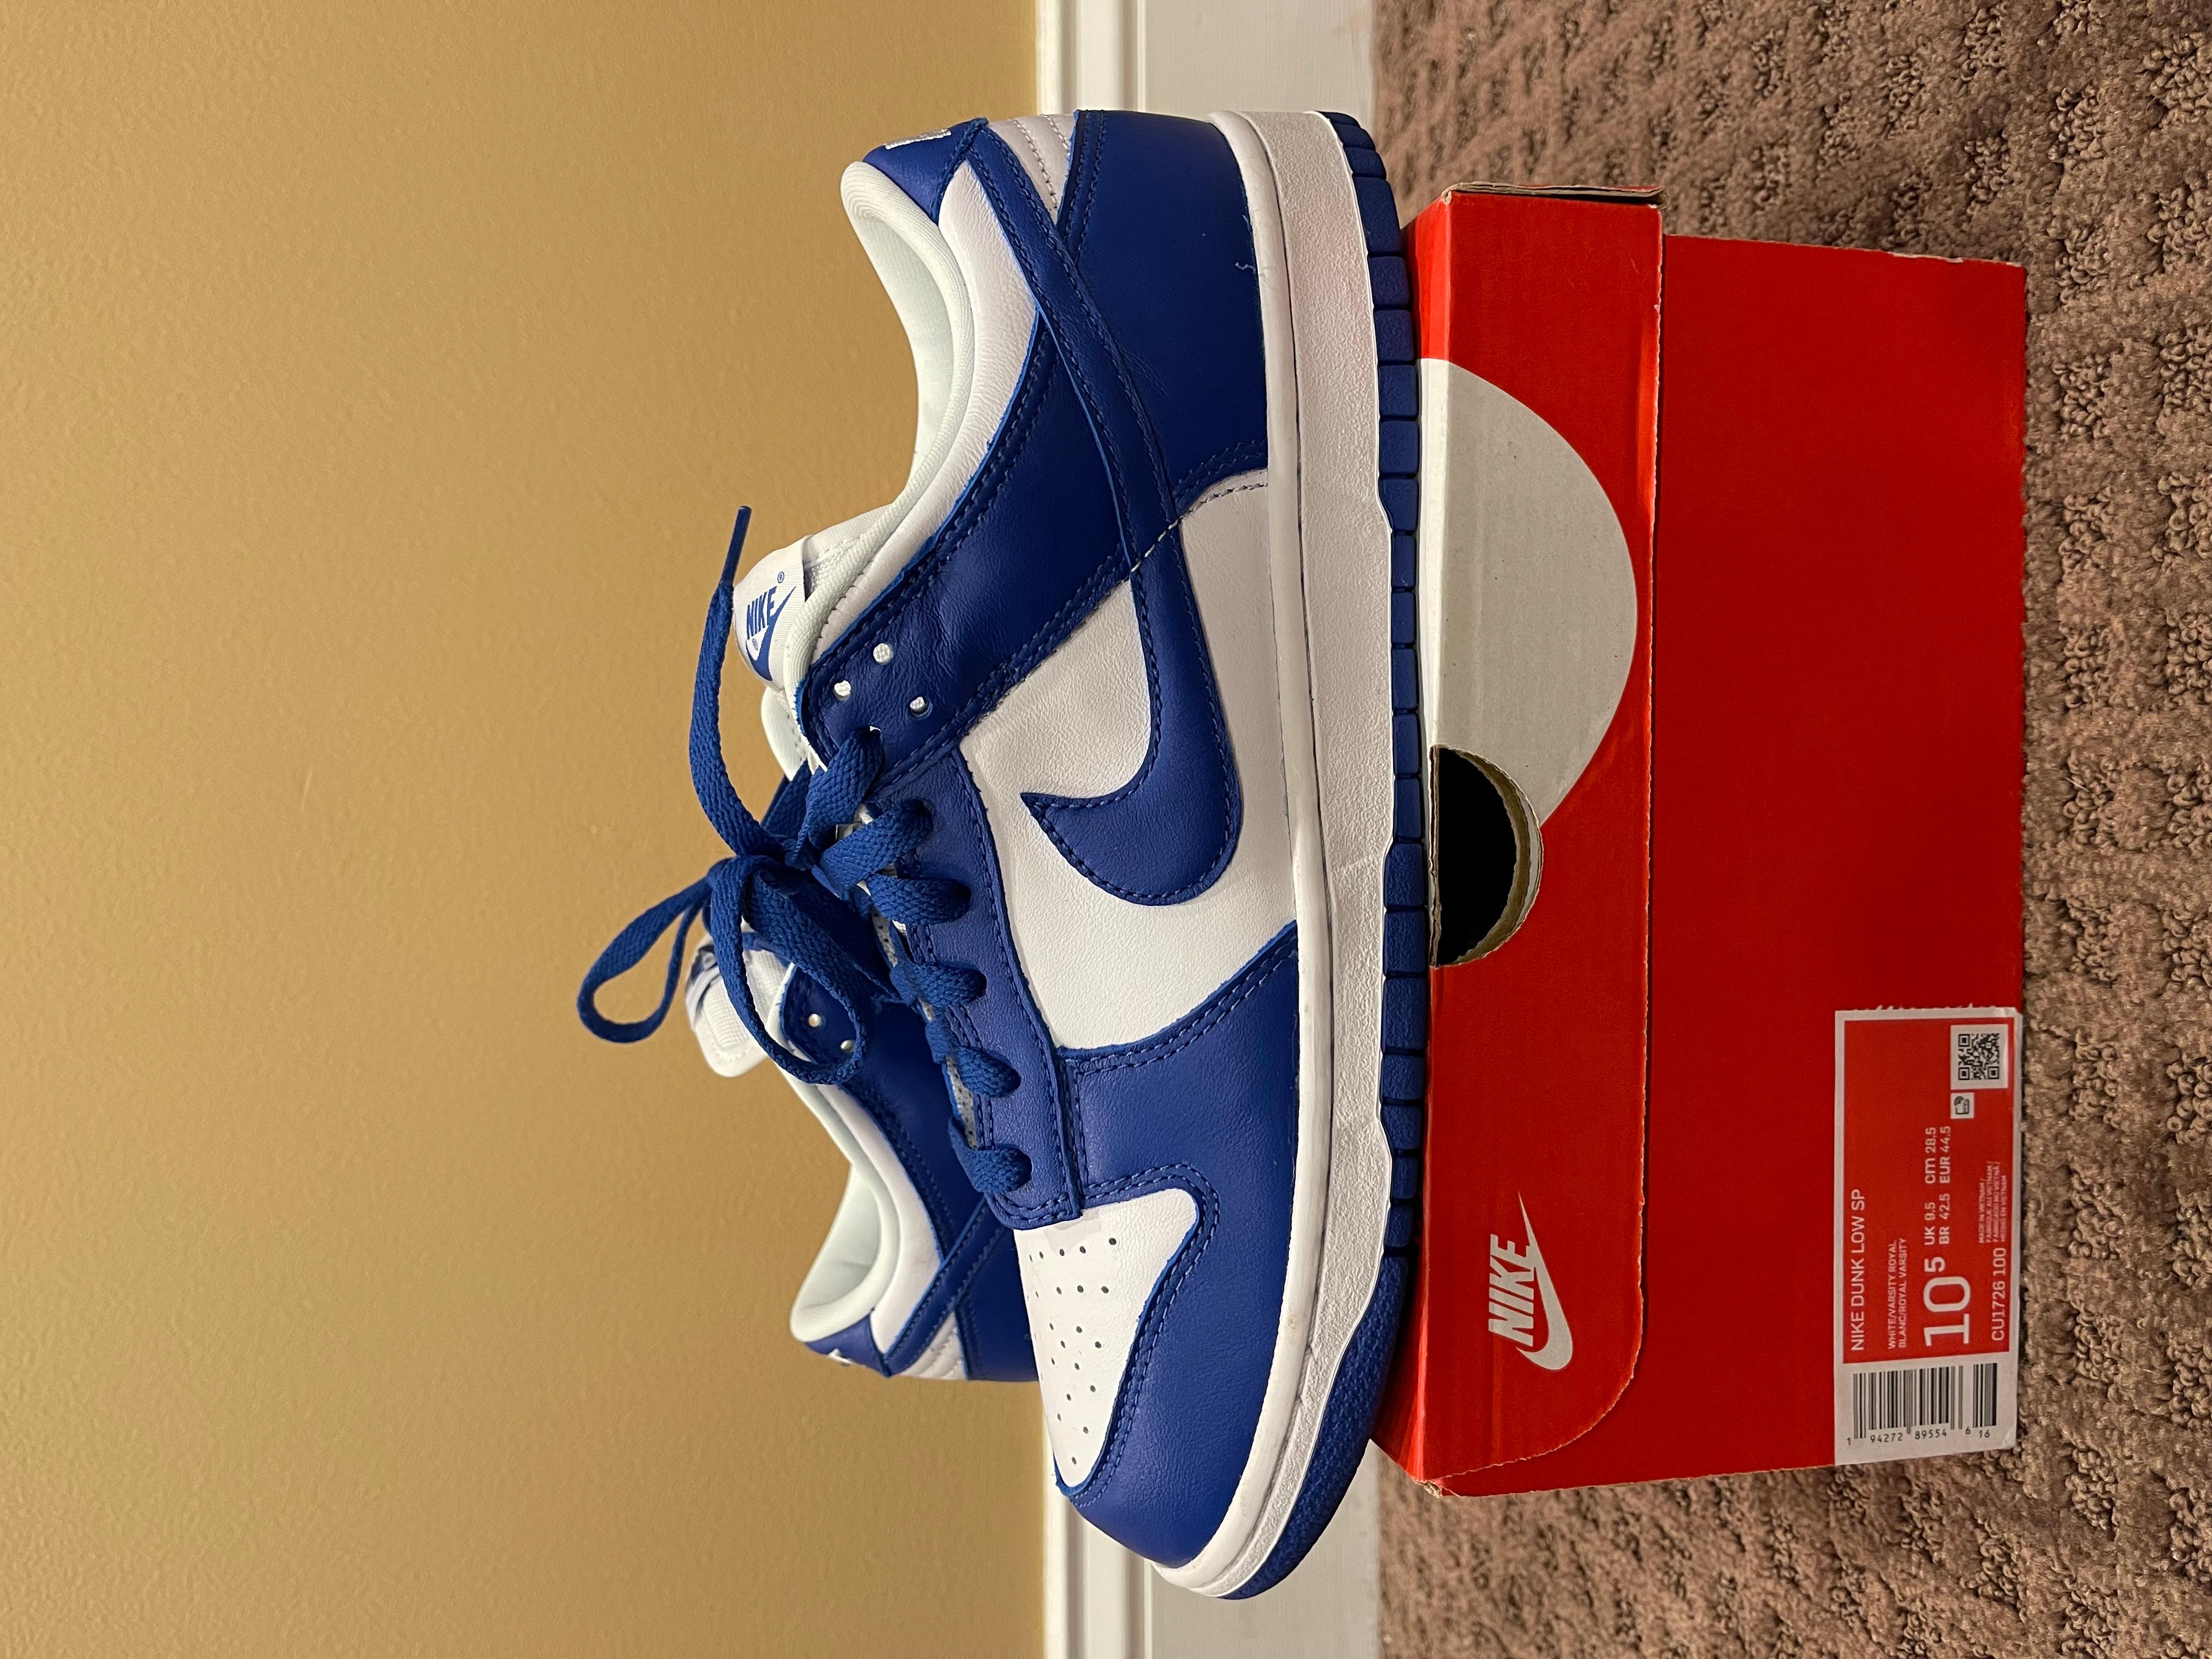 Nike Dunk Low Kentucky Blue 2020
Size 10.5
Og all
Excellent condition